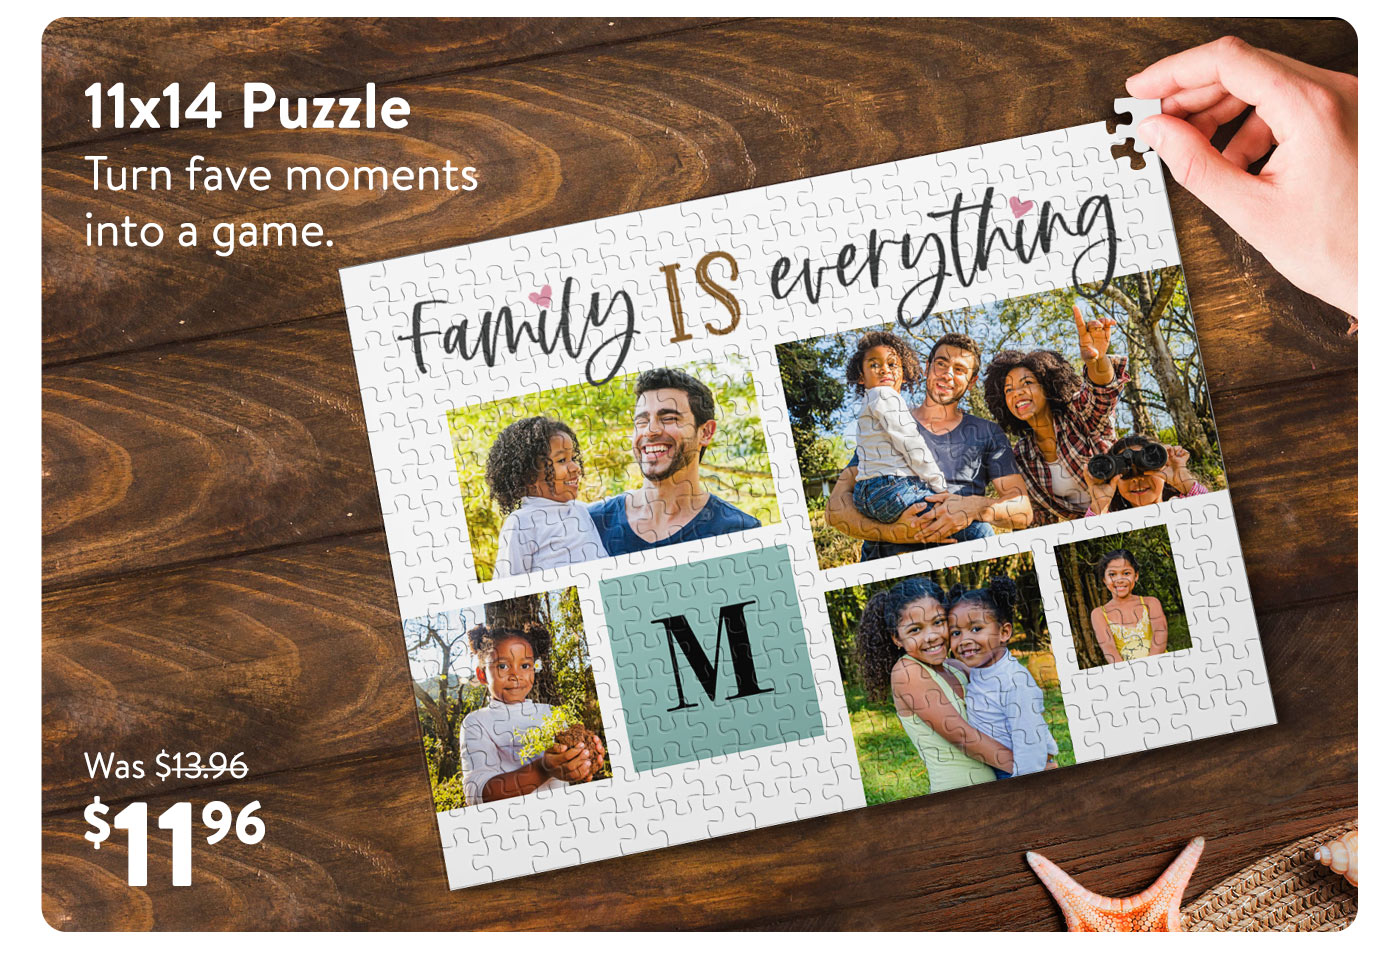 11x14 Puzzle $11.96, was $13.96